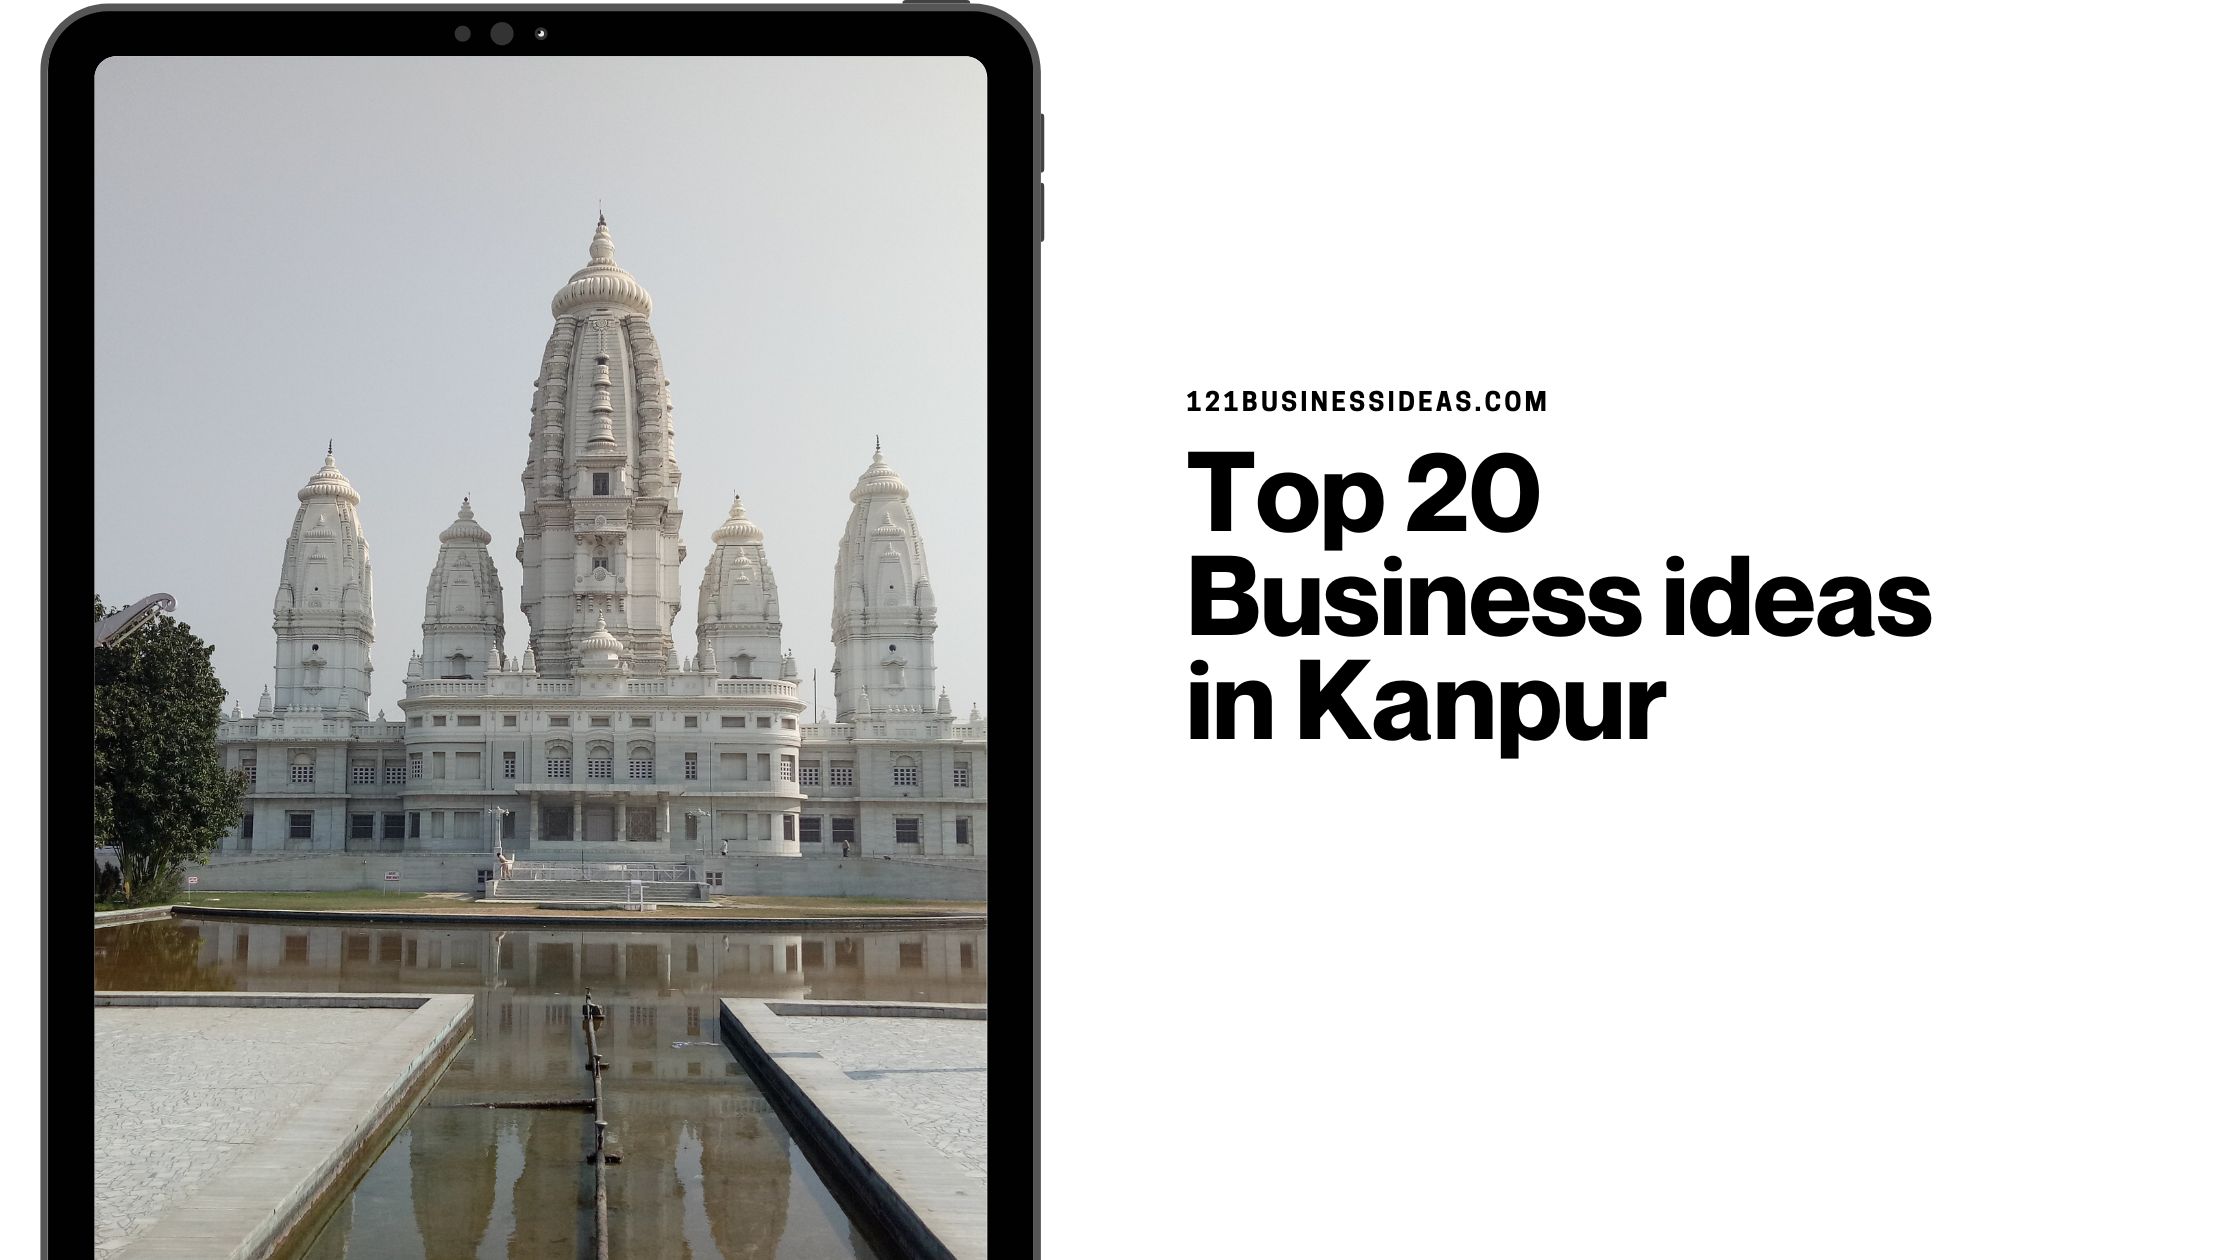 Top 20 Business ideas in Kanpur